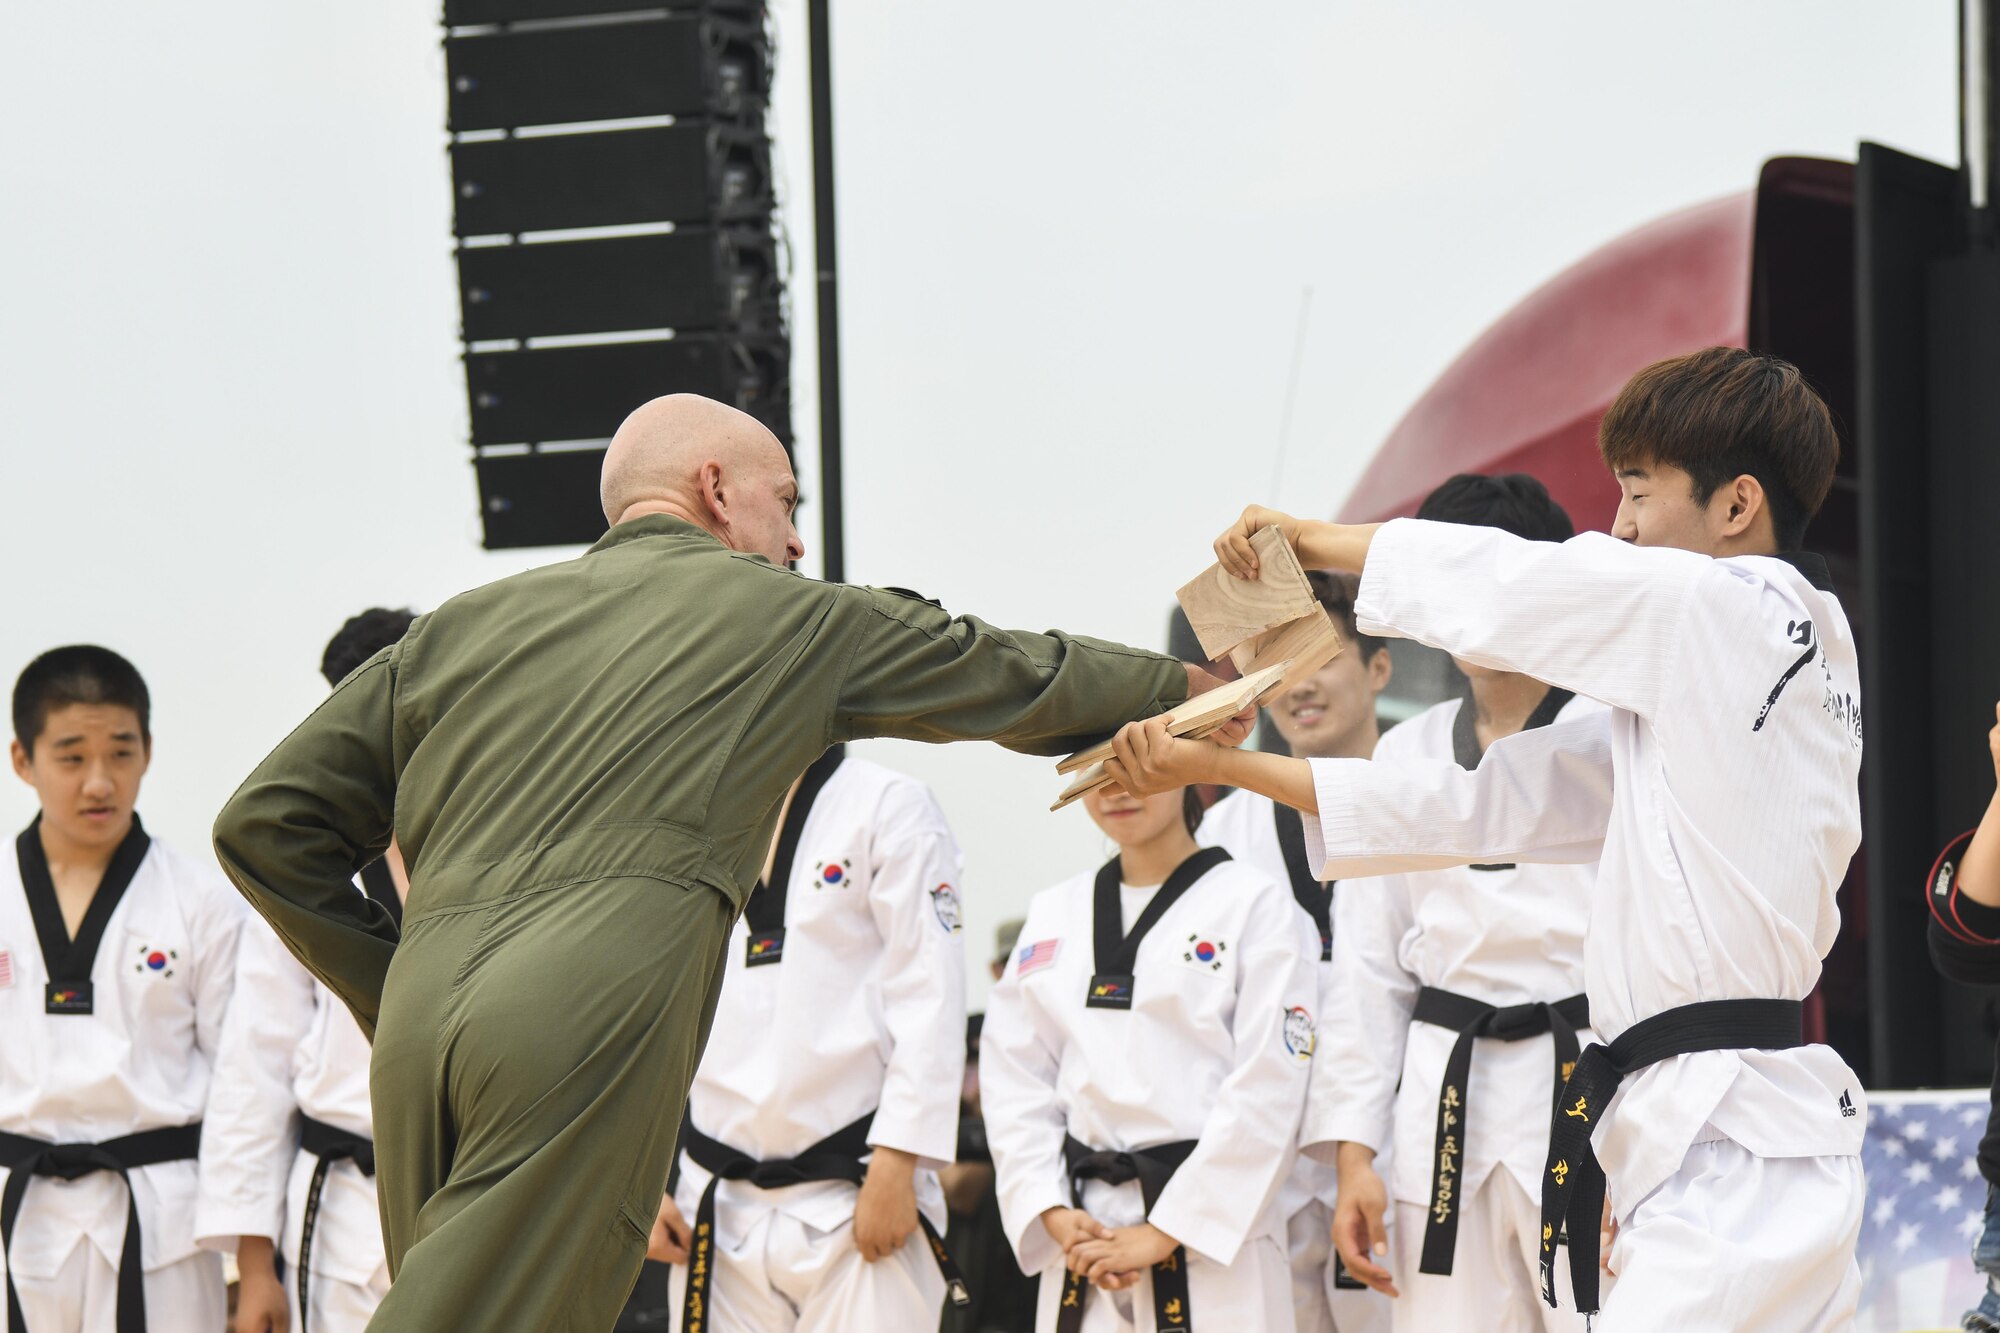 Col. Andrew Hansen, 51st Fighter Wing commander, punches through pieces of board after the Republic of Korea Martial Arts Demonstration Team performed their orchestrated movements during Air Power Day 2016 at Osan Air Base, Republic of Korea, Sept. 25, 2016. Members of Team Osan and the surrounding community participated in events for the air show such as static displays, aircraft takeoffs and aerial demonstrations. (U.S. Air Force photo by Tech. Sgt. Rasheen Douglas)